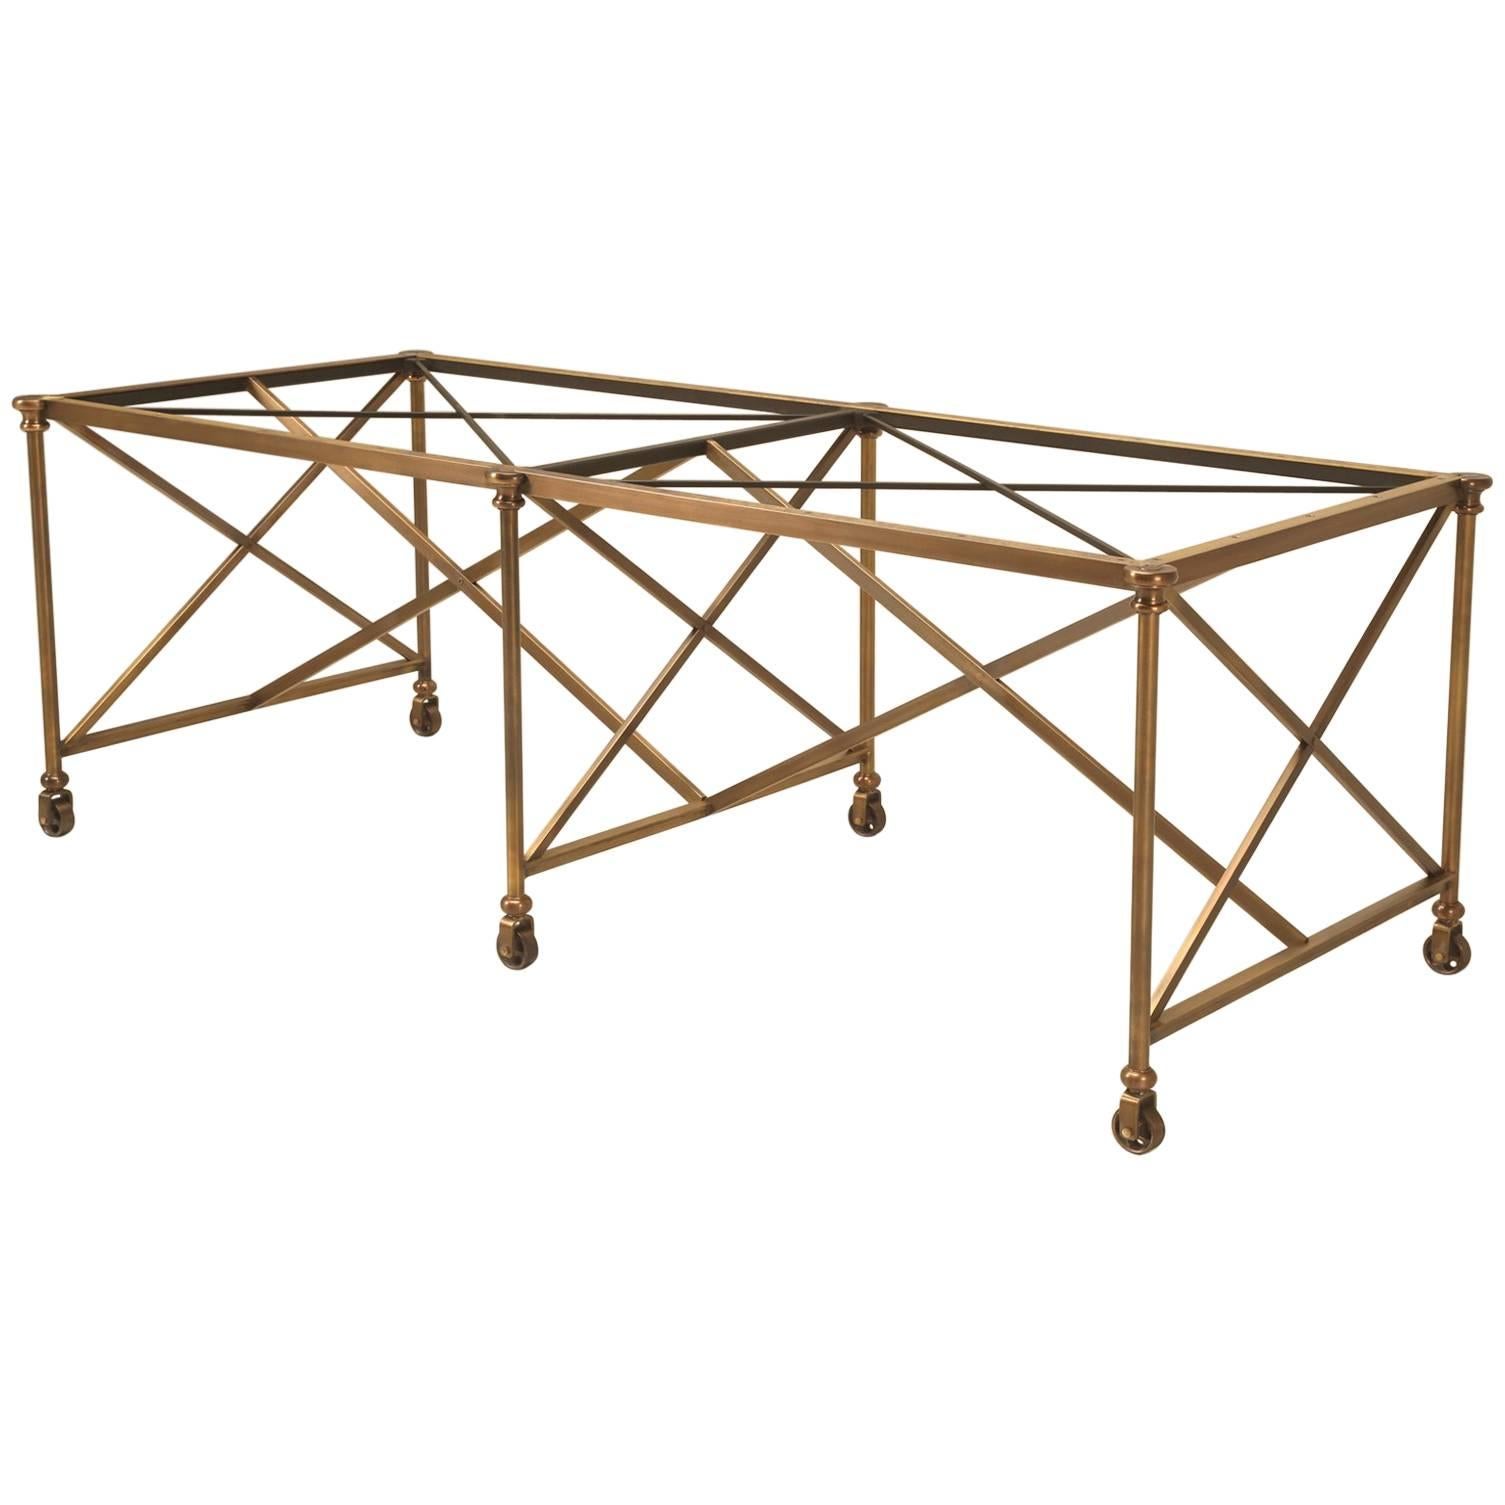 French Inspired Industrial Style Brass Kitchen Island Made to Order For Sale